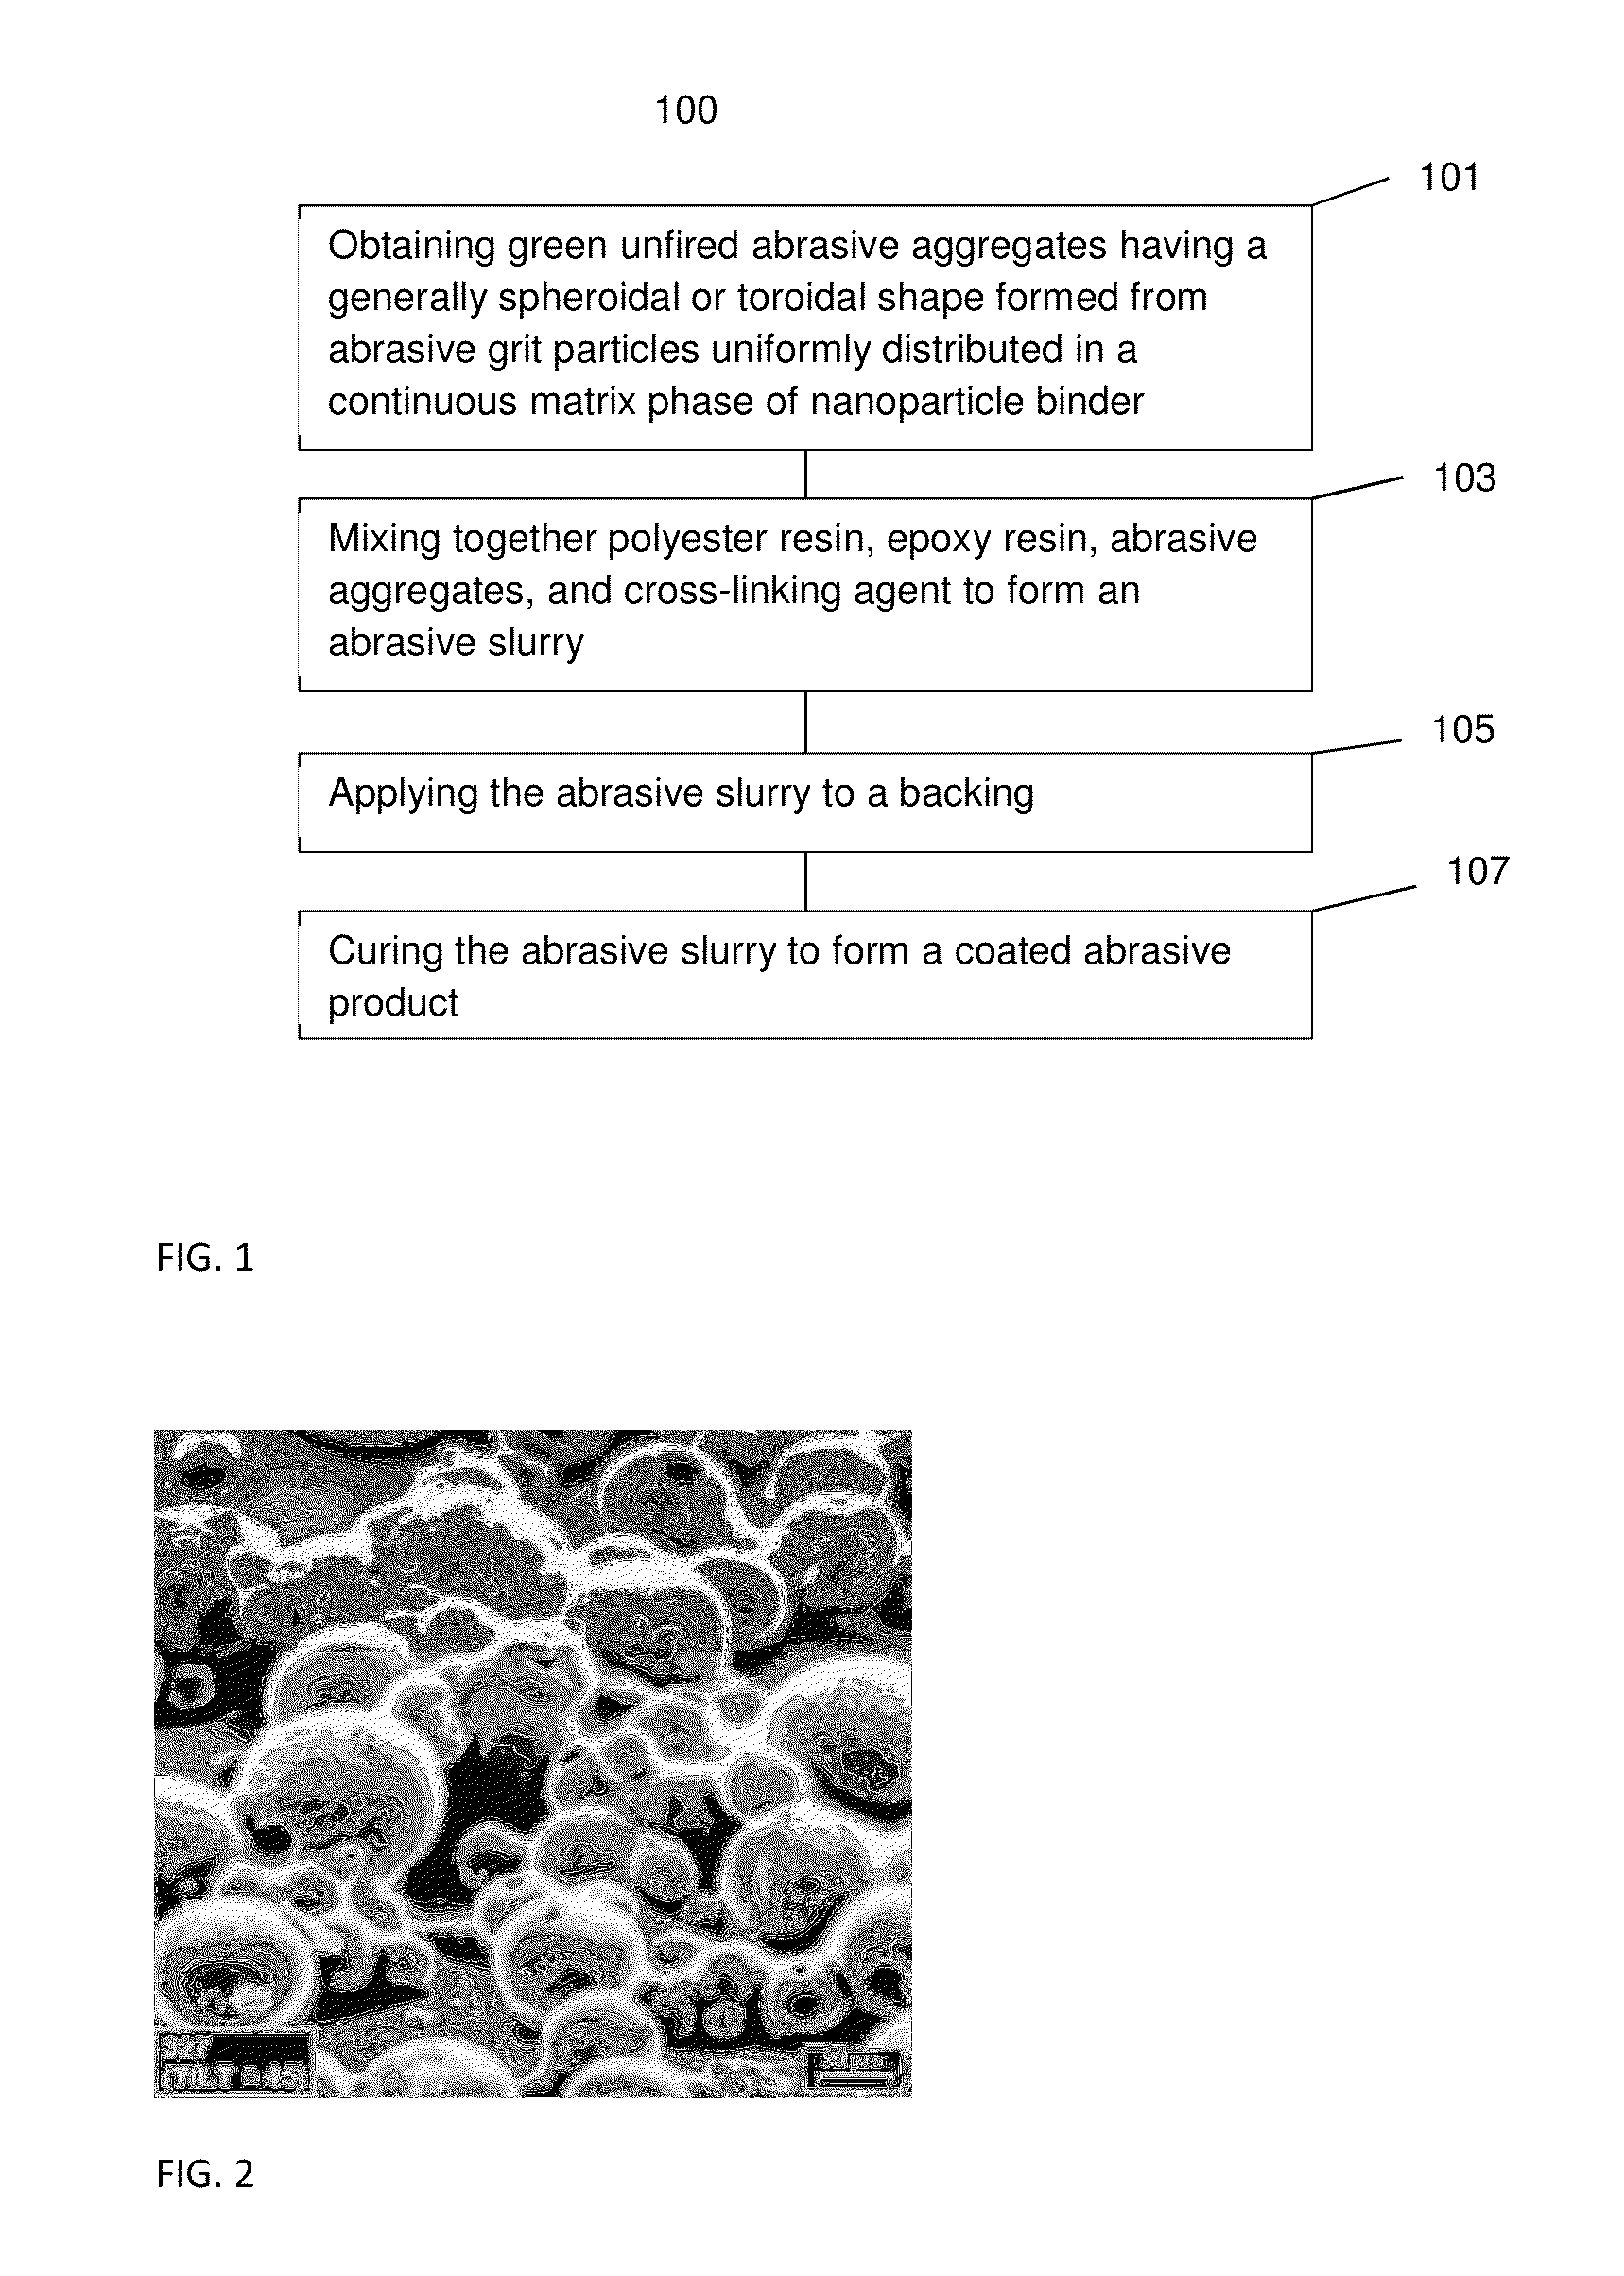 Abrasive products and methods for finishing hard surfaces